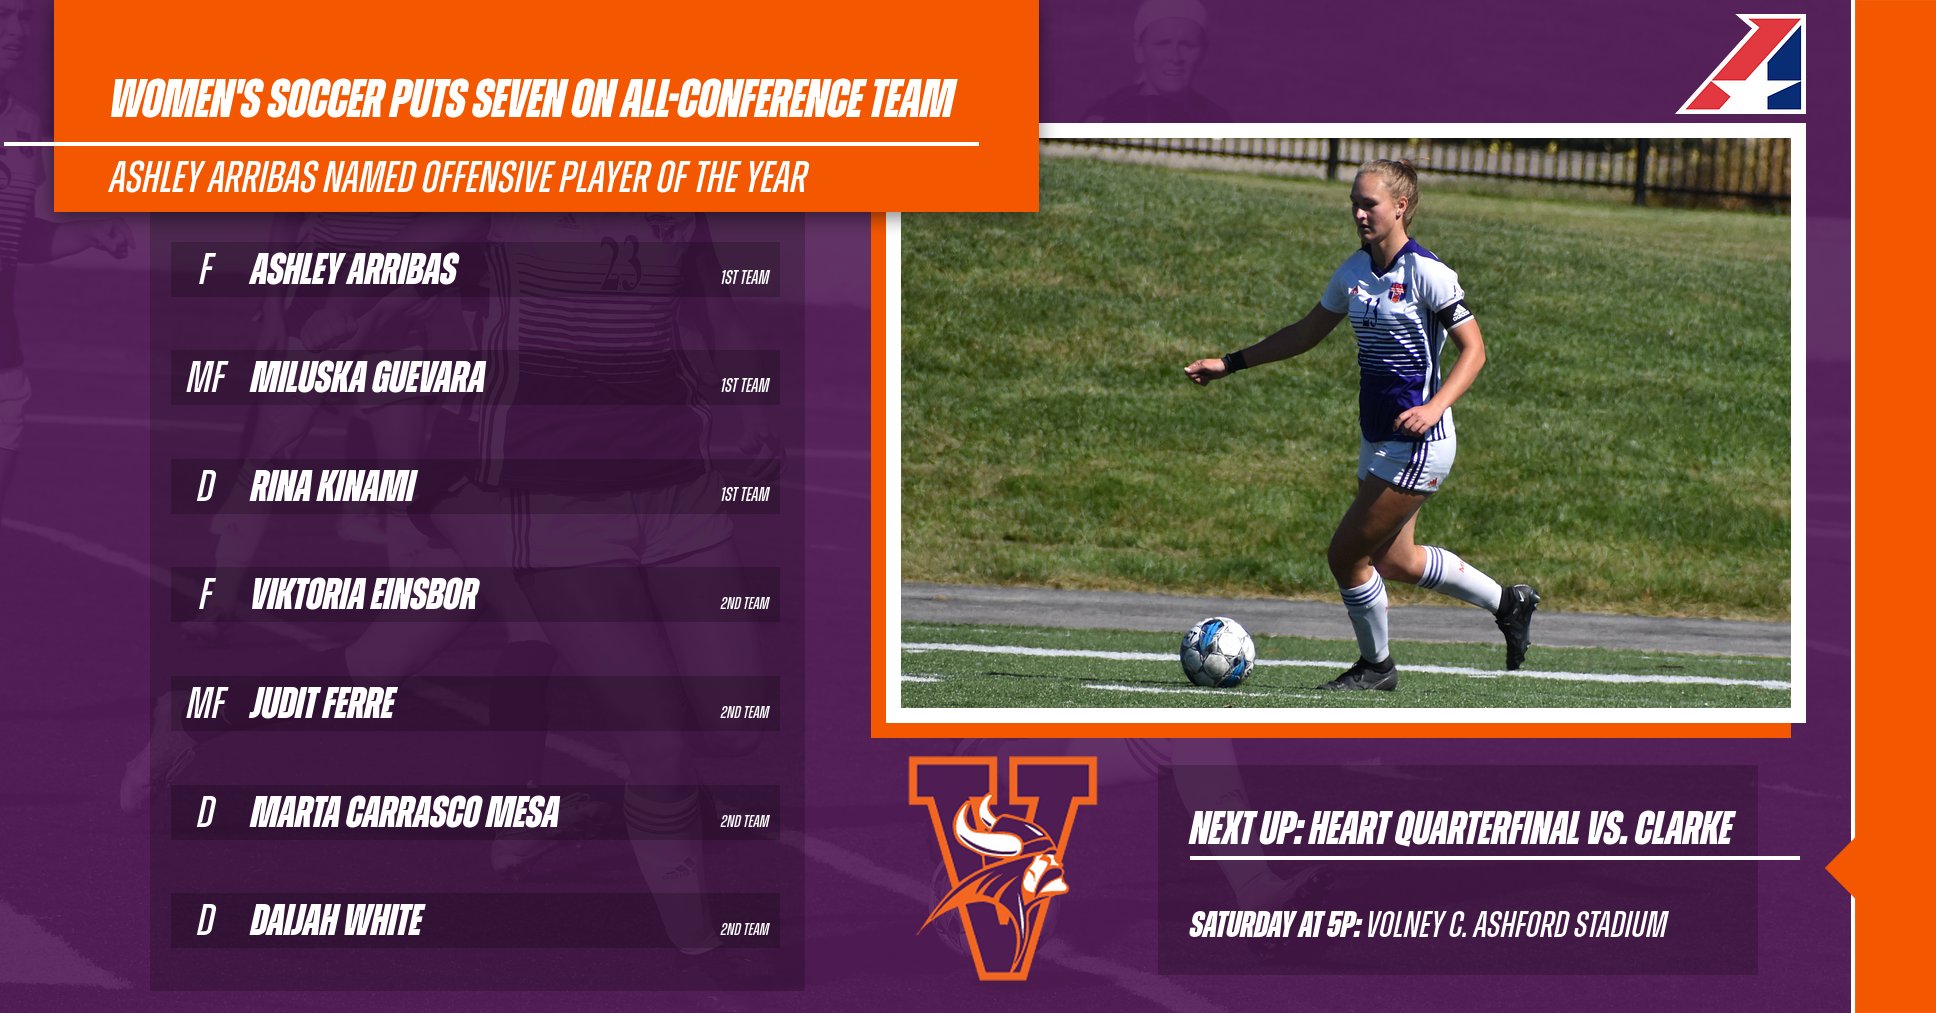 Women's Soccer Puts Seven on All-Conference Team, Offensive Player of the Year